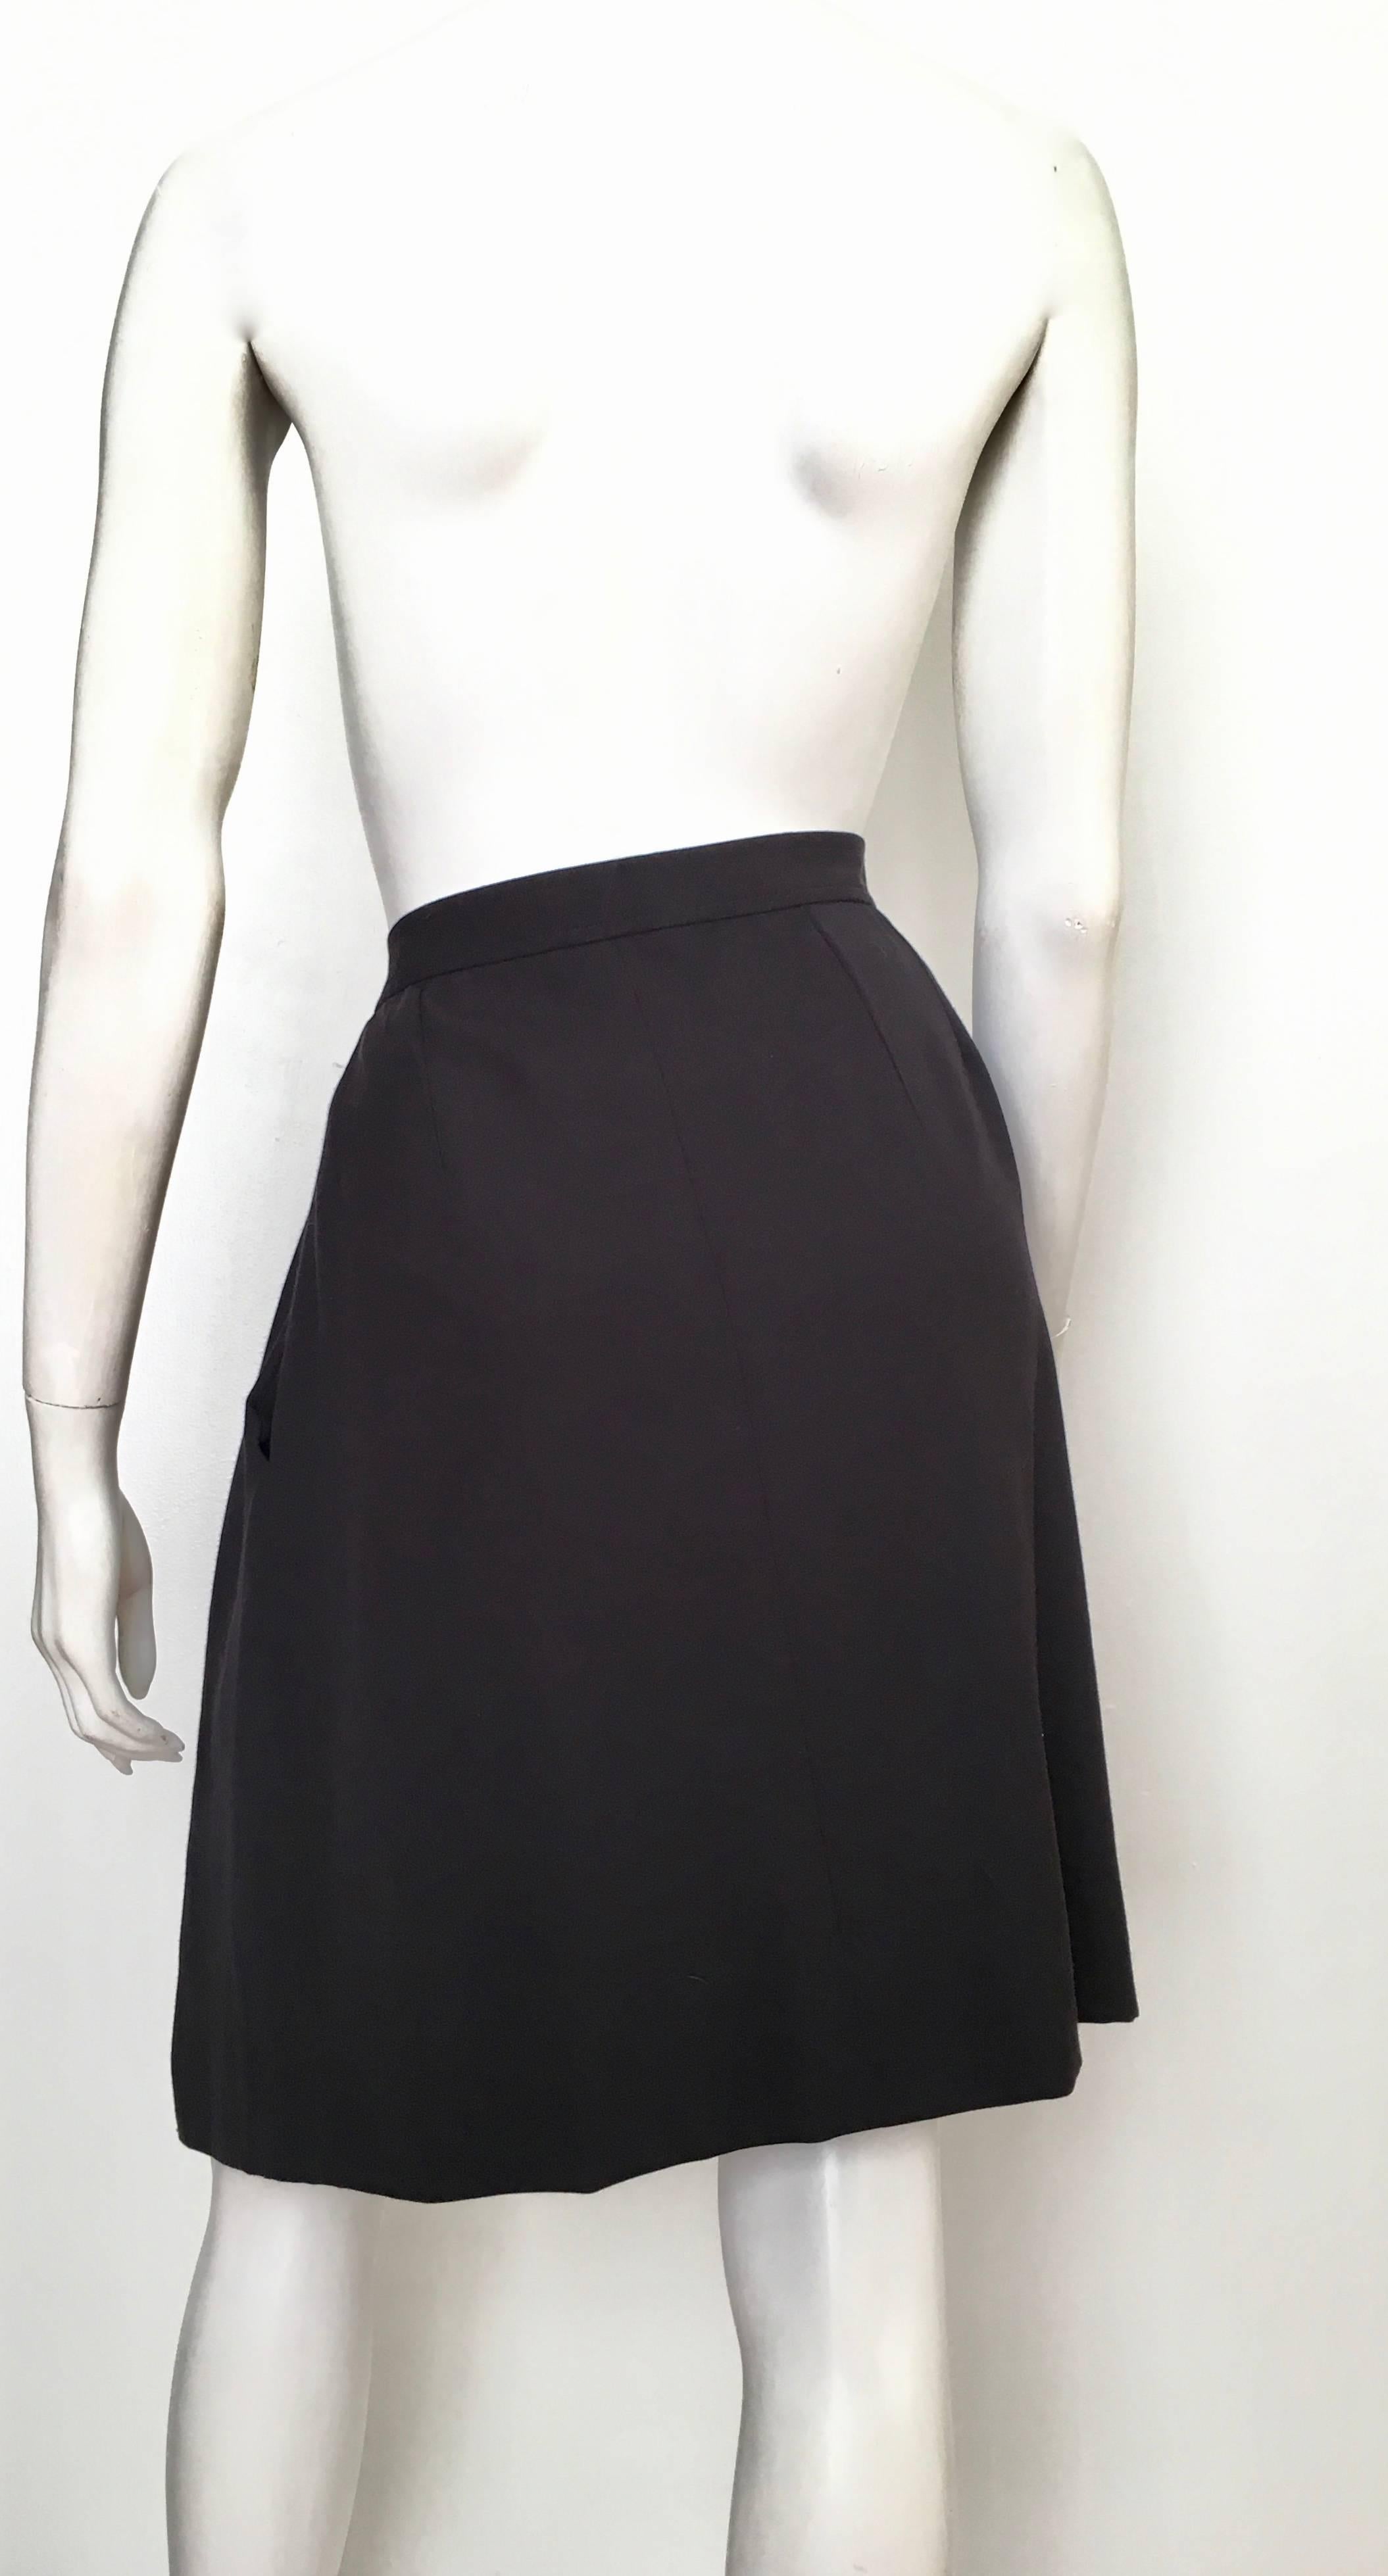 Women's or Men's Yves Saint Laurent 1990s Black Wool Wrap Skirt with Pockets Size 6 / 8. For Sale